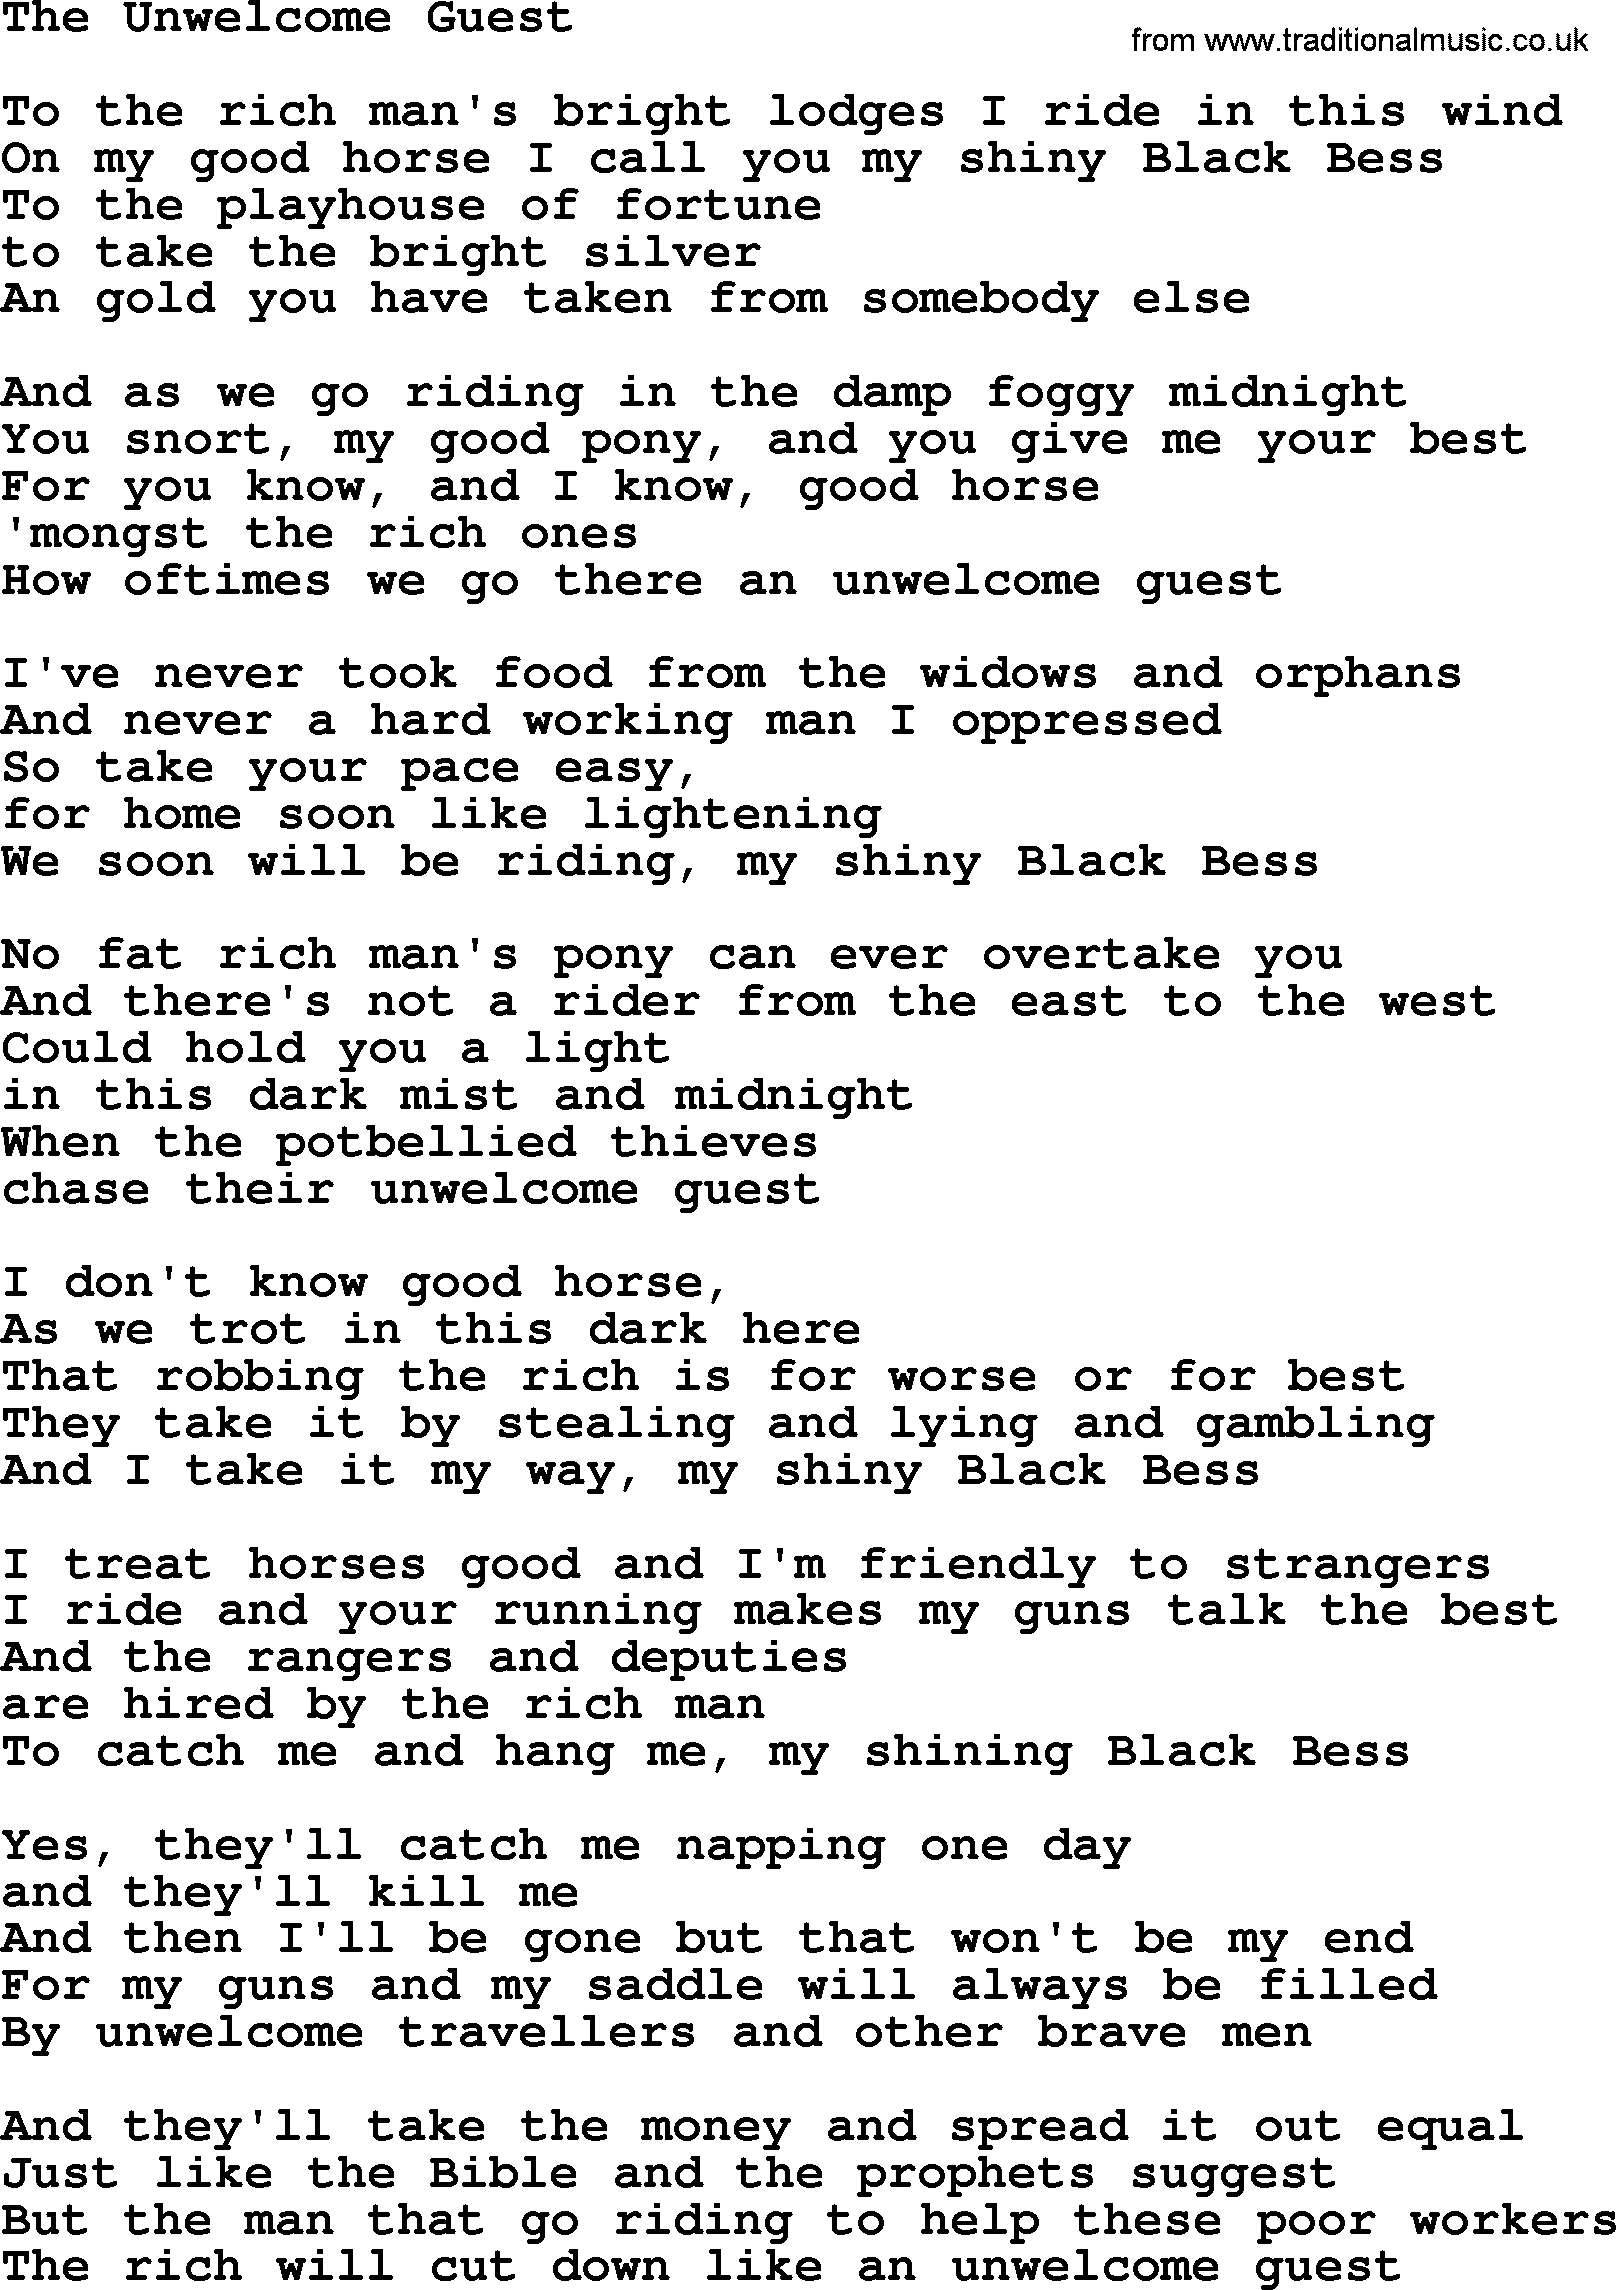 Woody Guthrie song The Unwelcome Guest lyrics